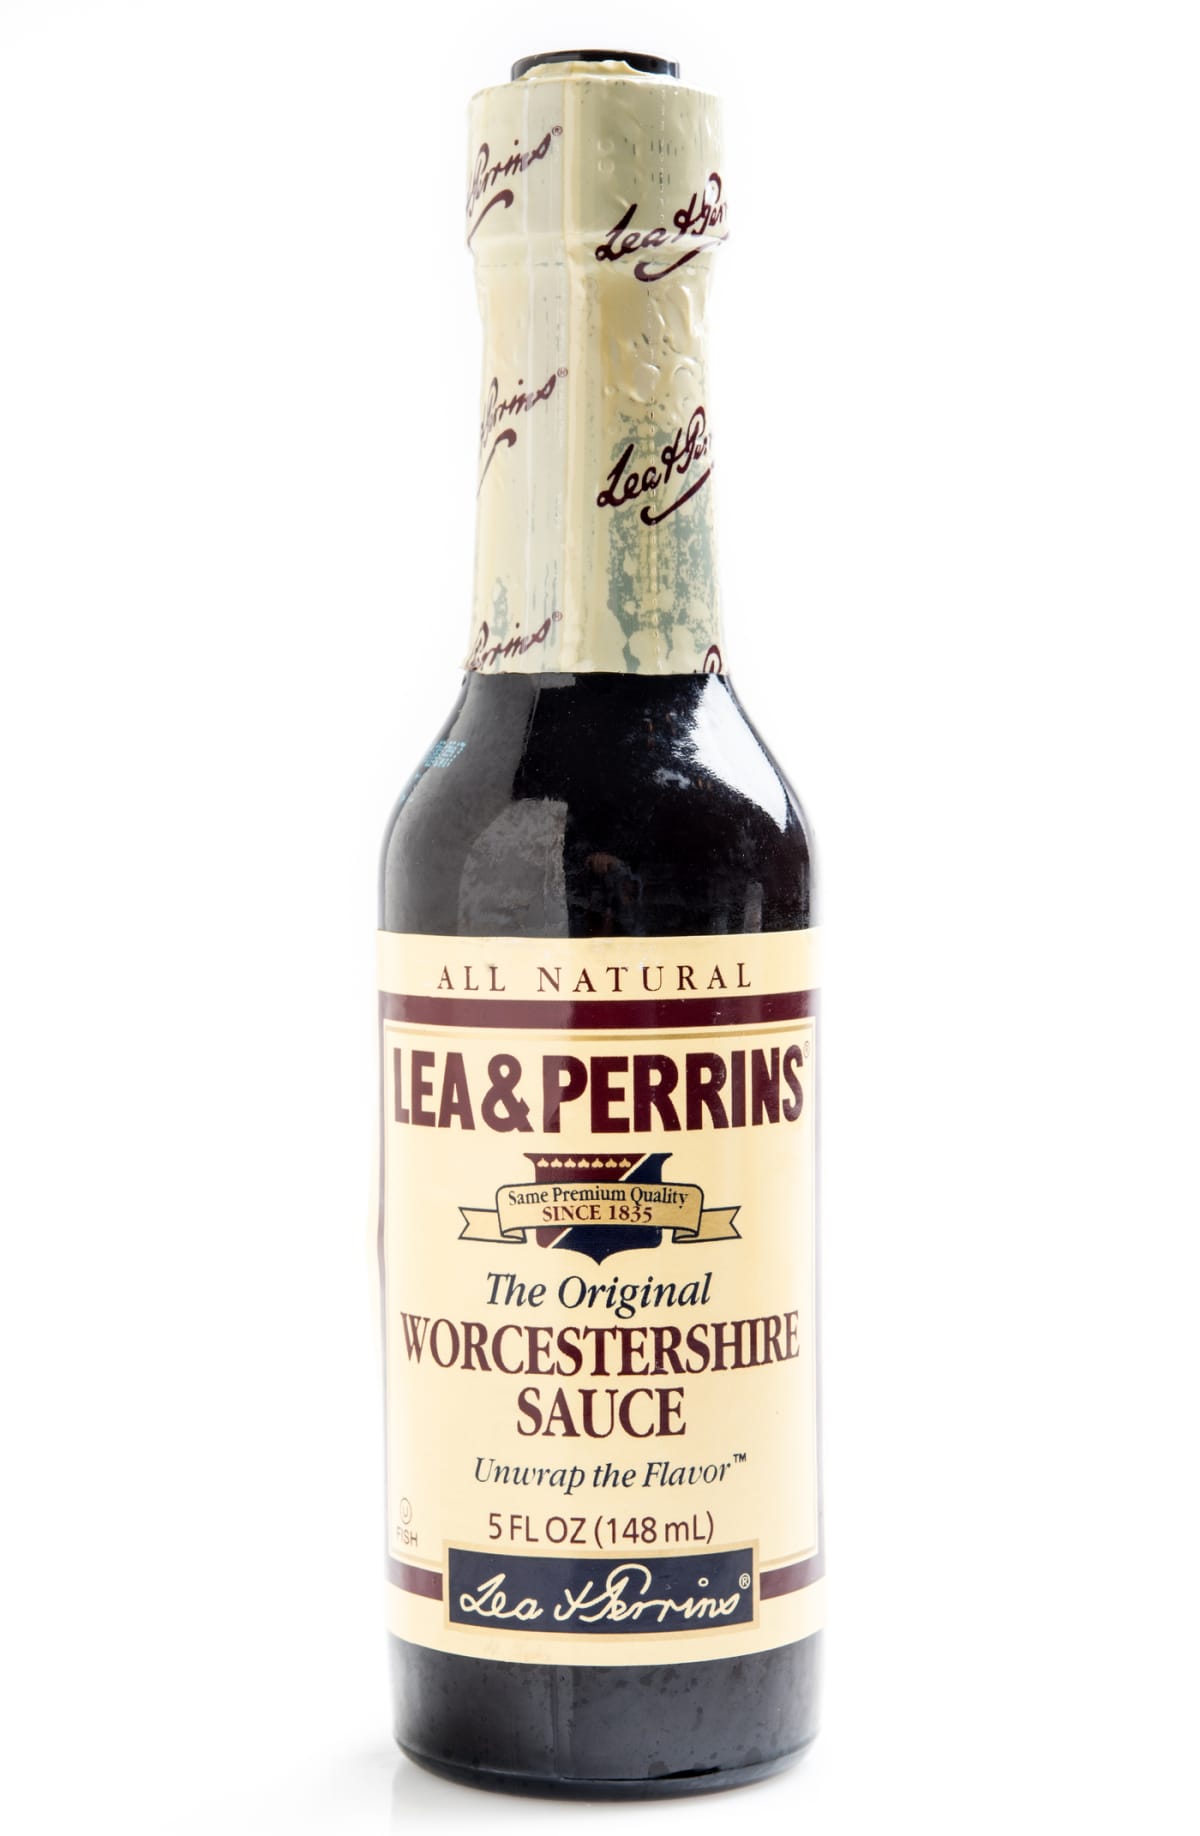 Chico, California, USA - May 14,2011 : A close up of a 10 FL OZ bottle of Lea & Perrins original Worcestershire Sauce in its famous brown paper wrap. Lea & Perrins began wrapping the bottles in paper to prevent breakage during long and lengthy sea voyages as they exported their product all over the world.